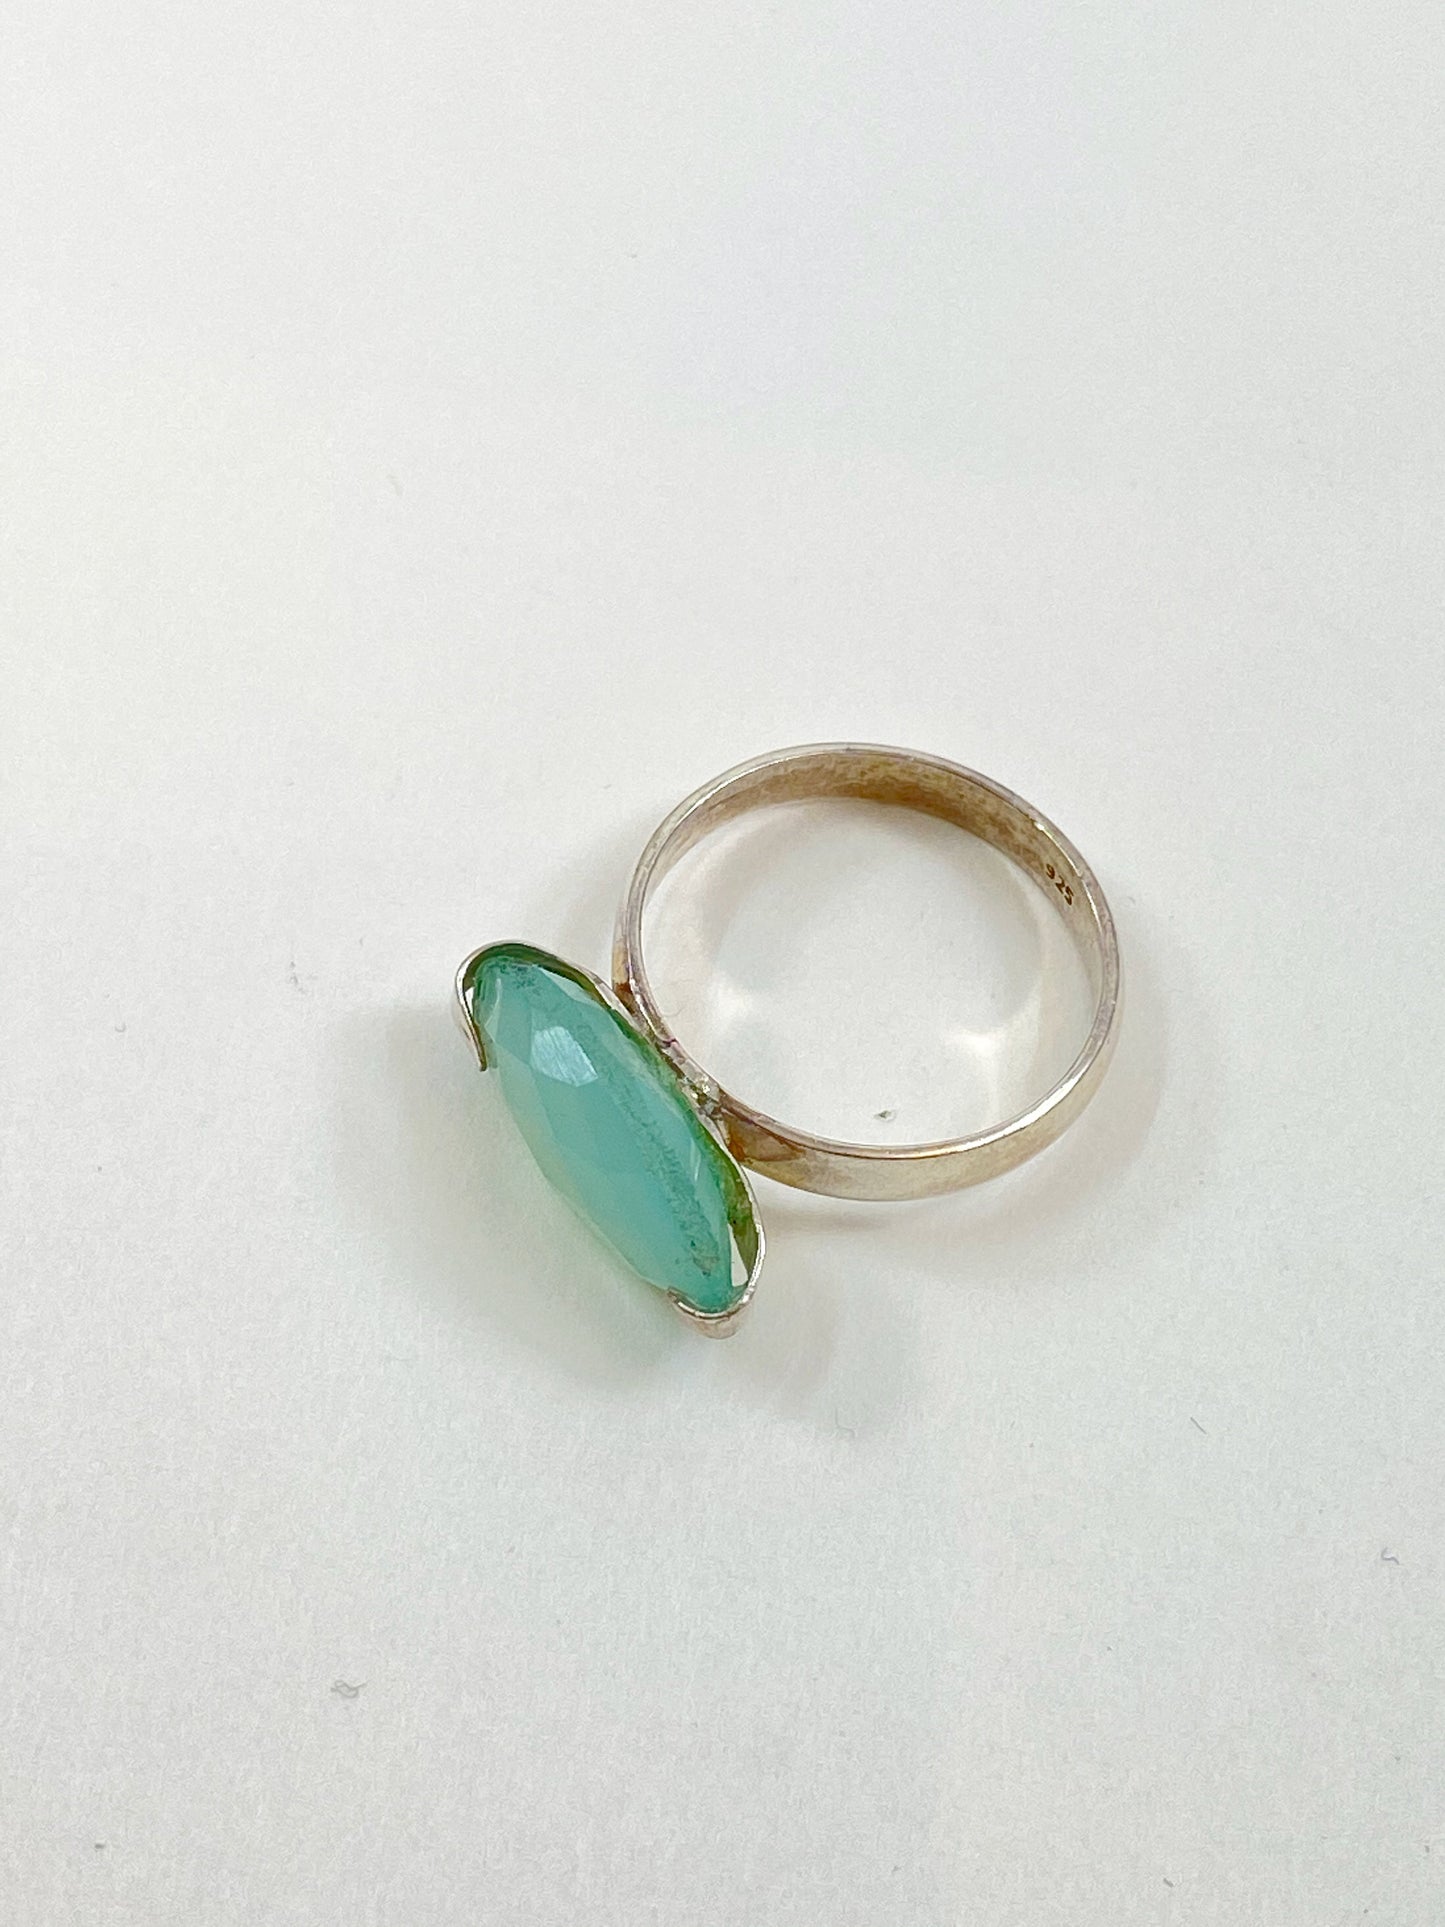 Gorgeous handmade Chalcedony stone sterling silver ring. This beautiful marquise cut stone is a size 6 1/2 stunning ring.